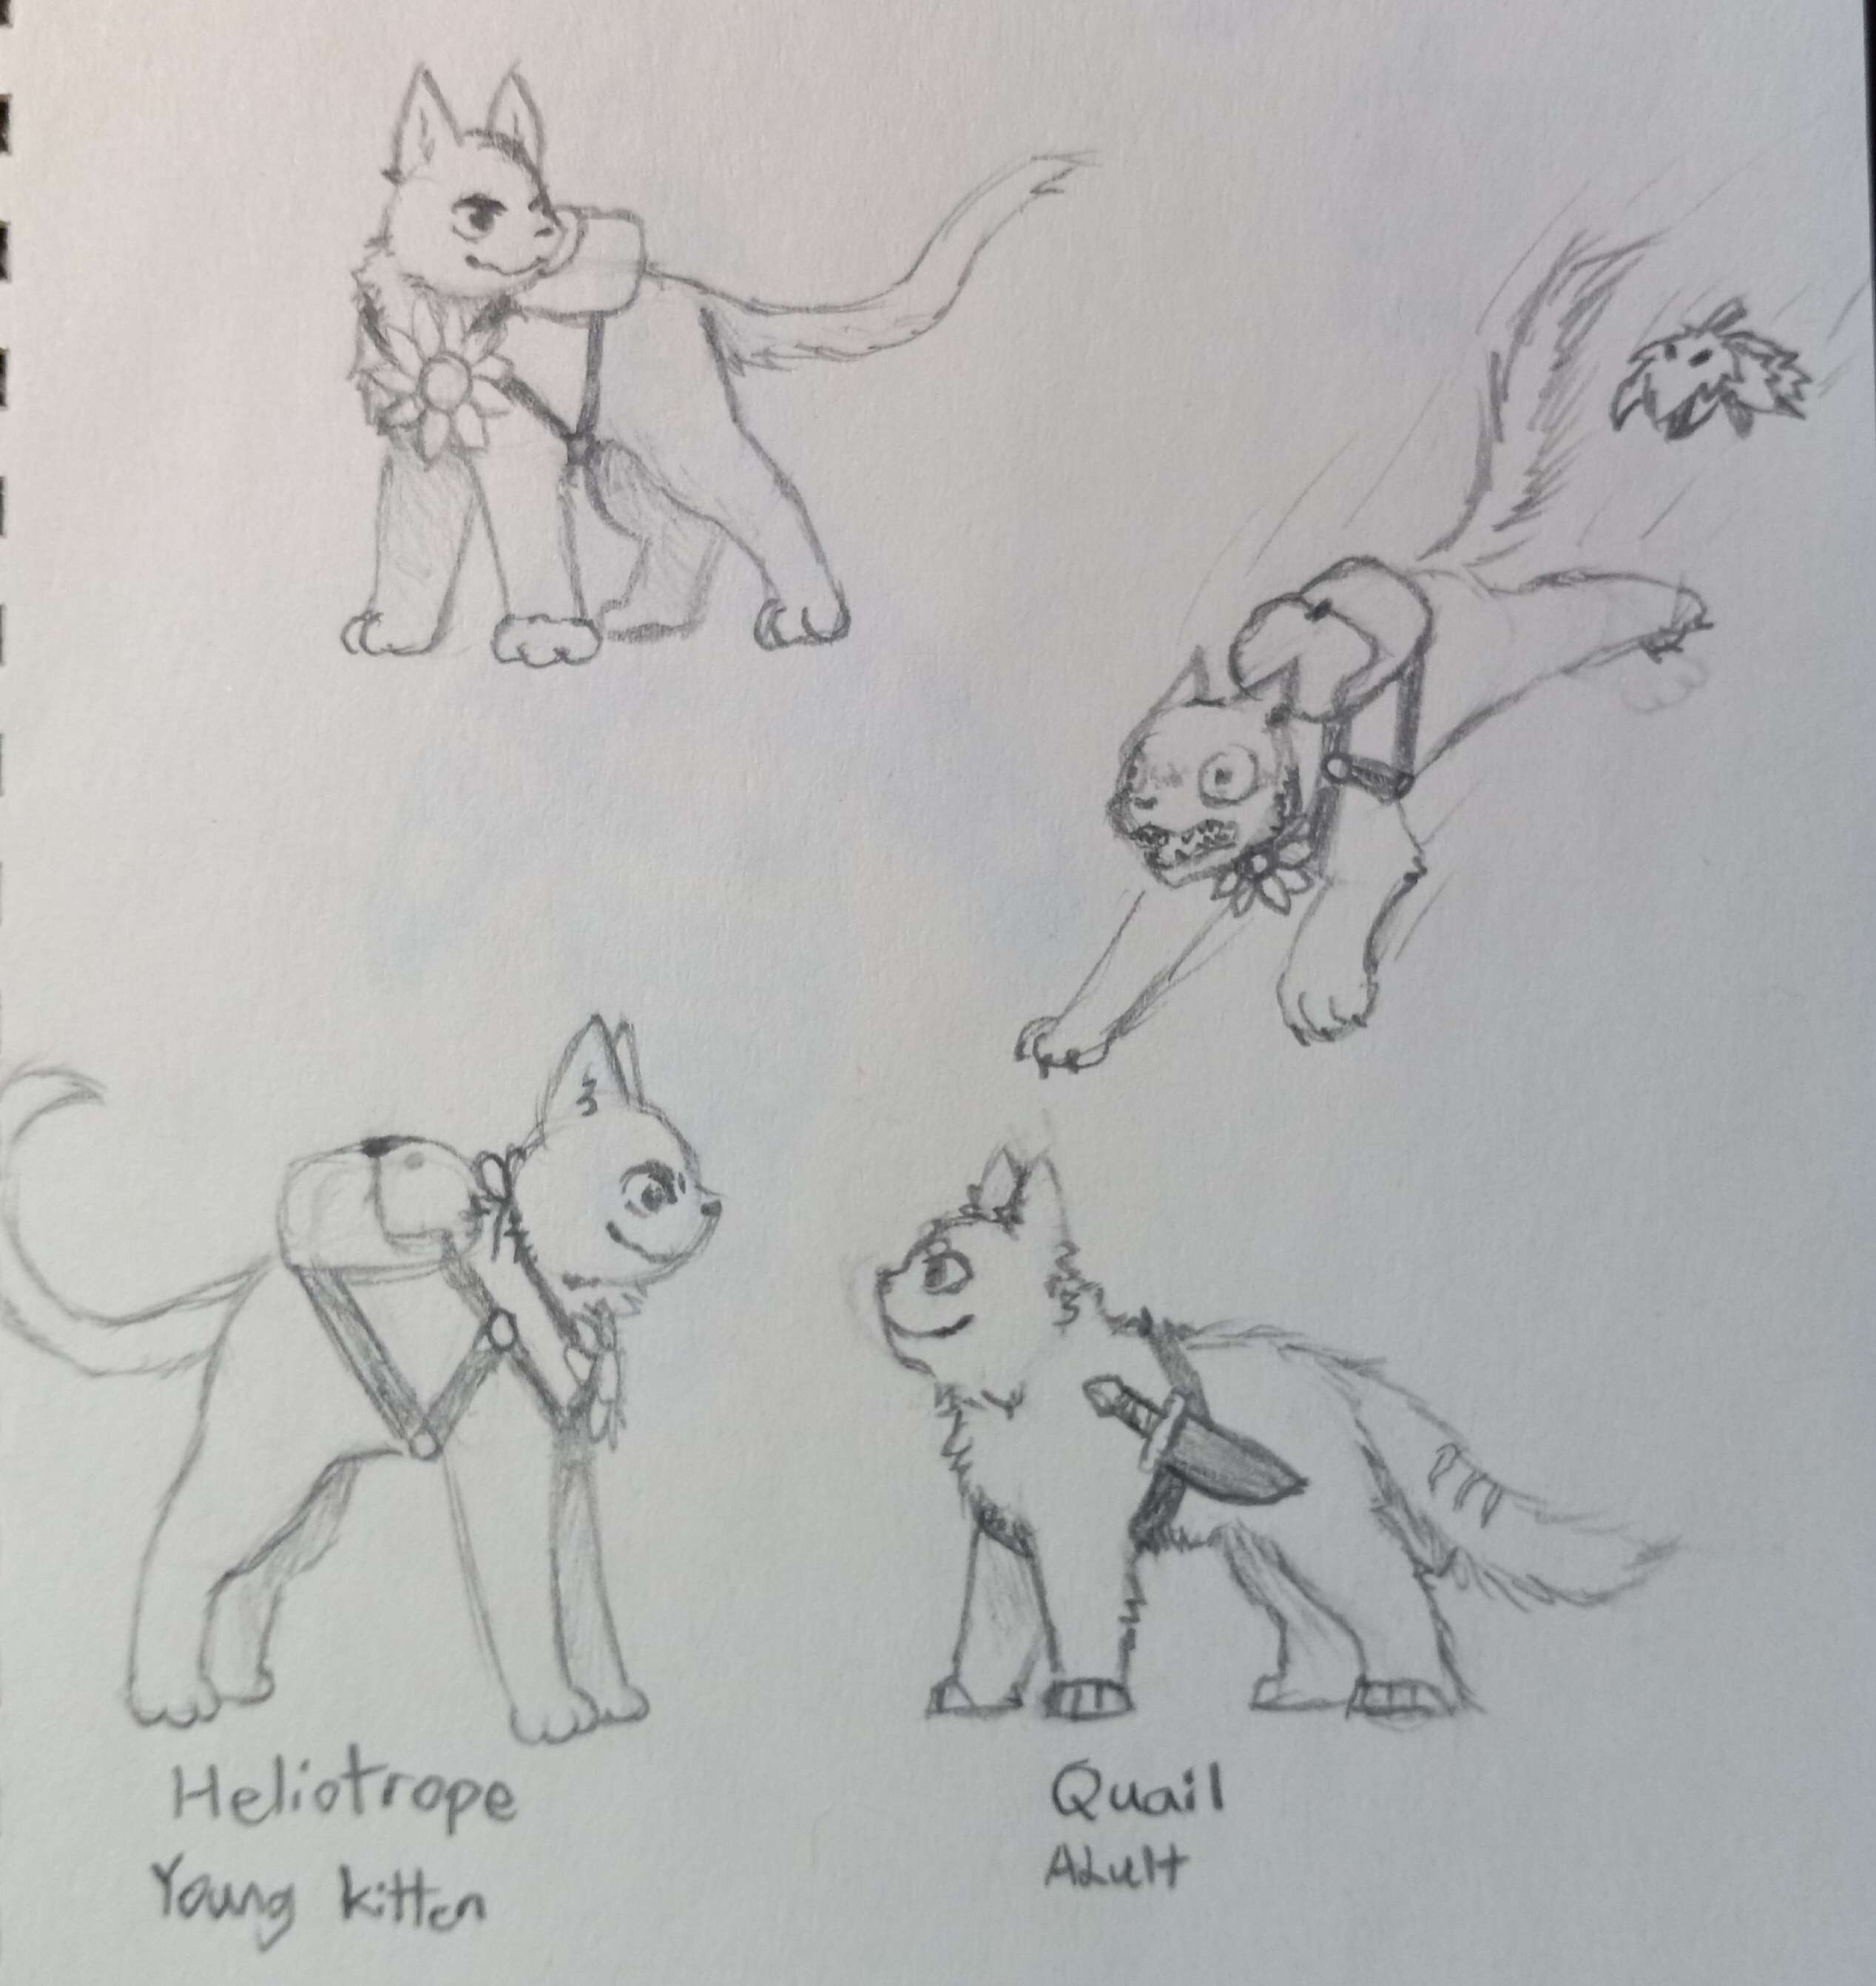 A group of drawings including a lanky not-kitten wearing a sunflower necklace and a backpack. One of which is them standing confidently, another is of them running away from a Leaf Mite, and the third is them staring down at Quail, of whom is older than Heliotrope yet still shorter than him.